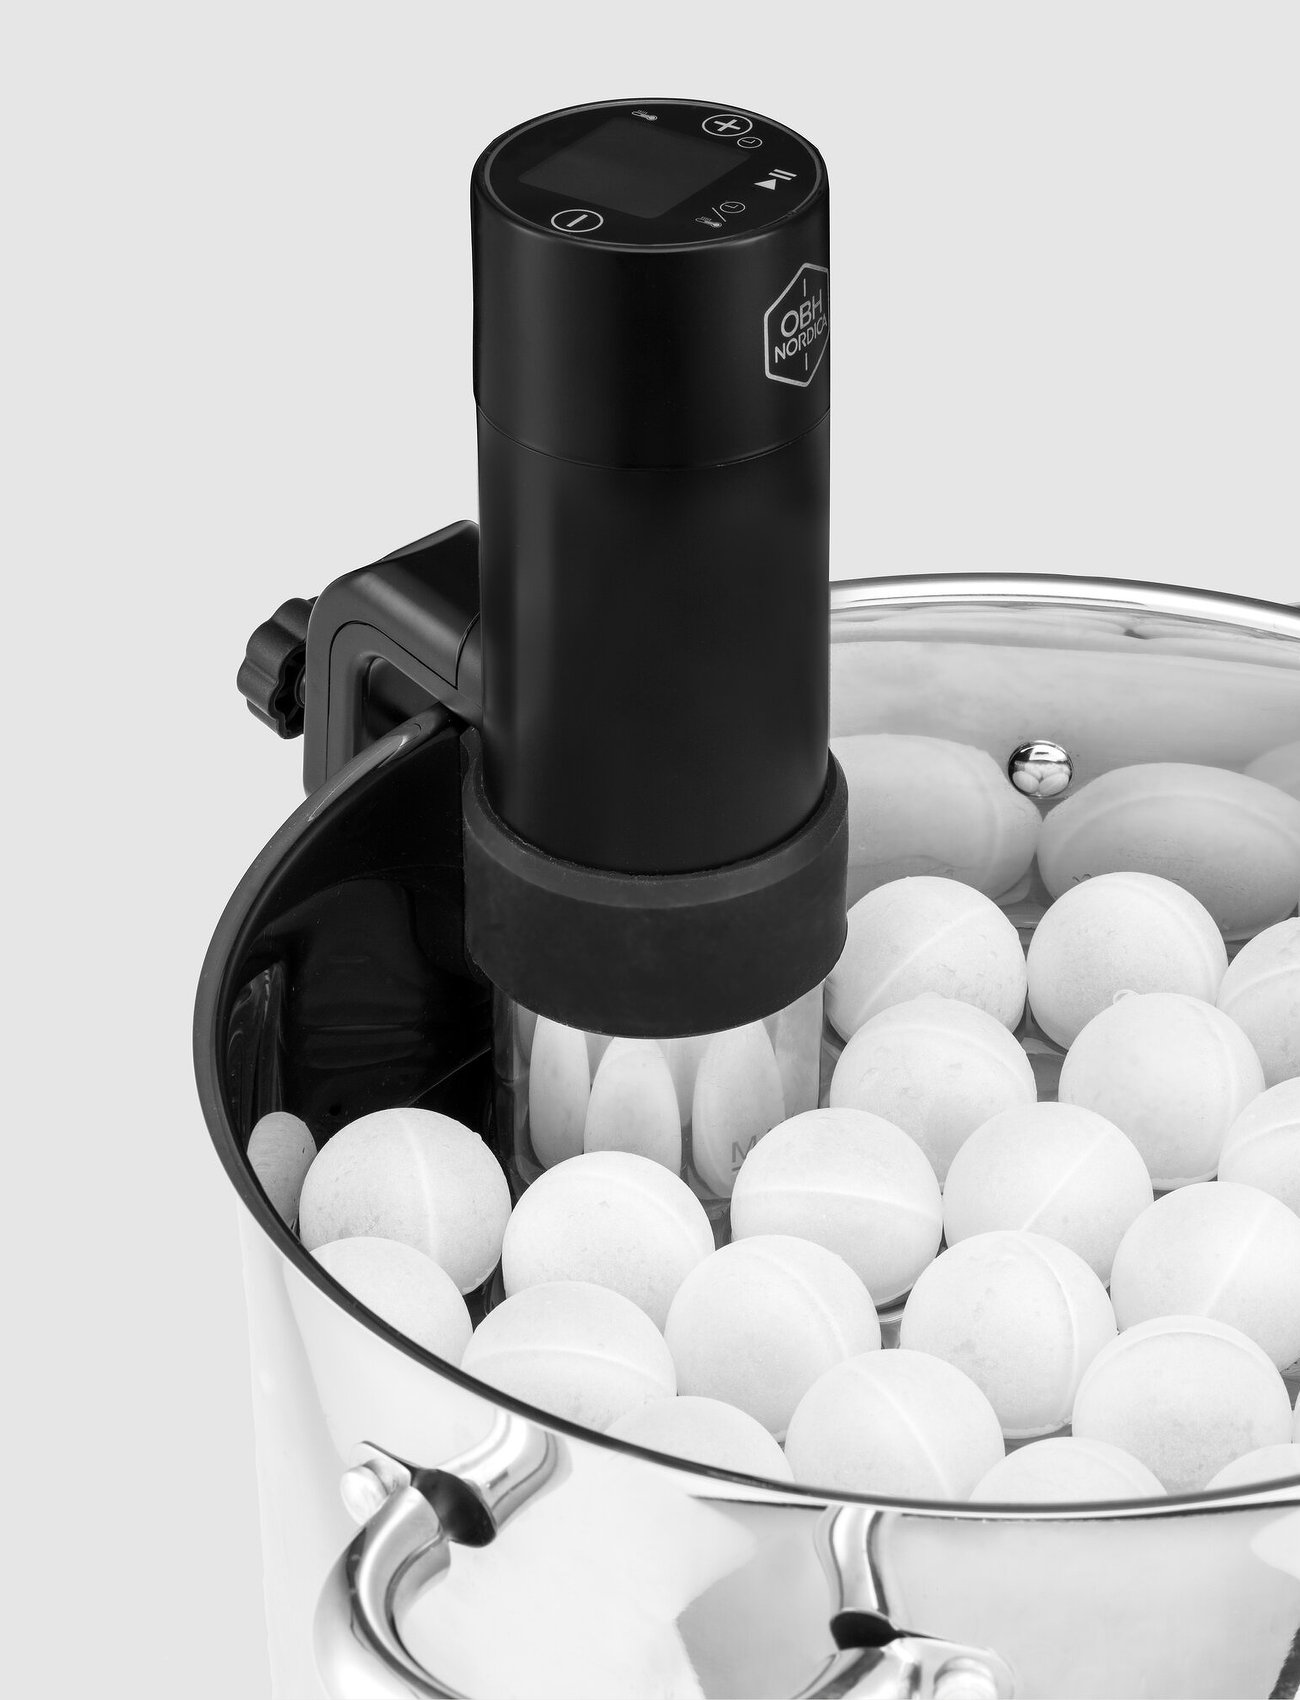 OBH Nordica - Immersion sous vide pro plus sous vide cooker - birthday gifts - black and stainless steel - 1